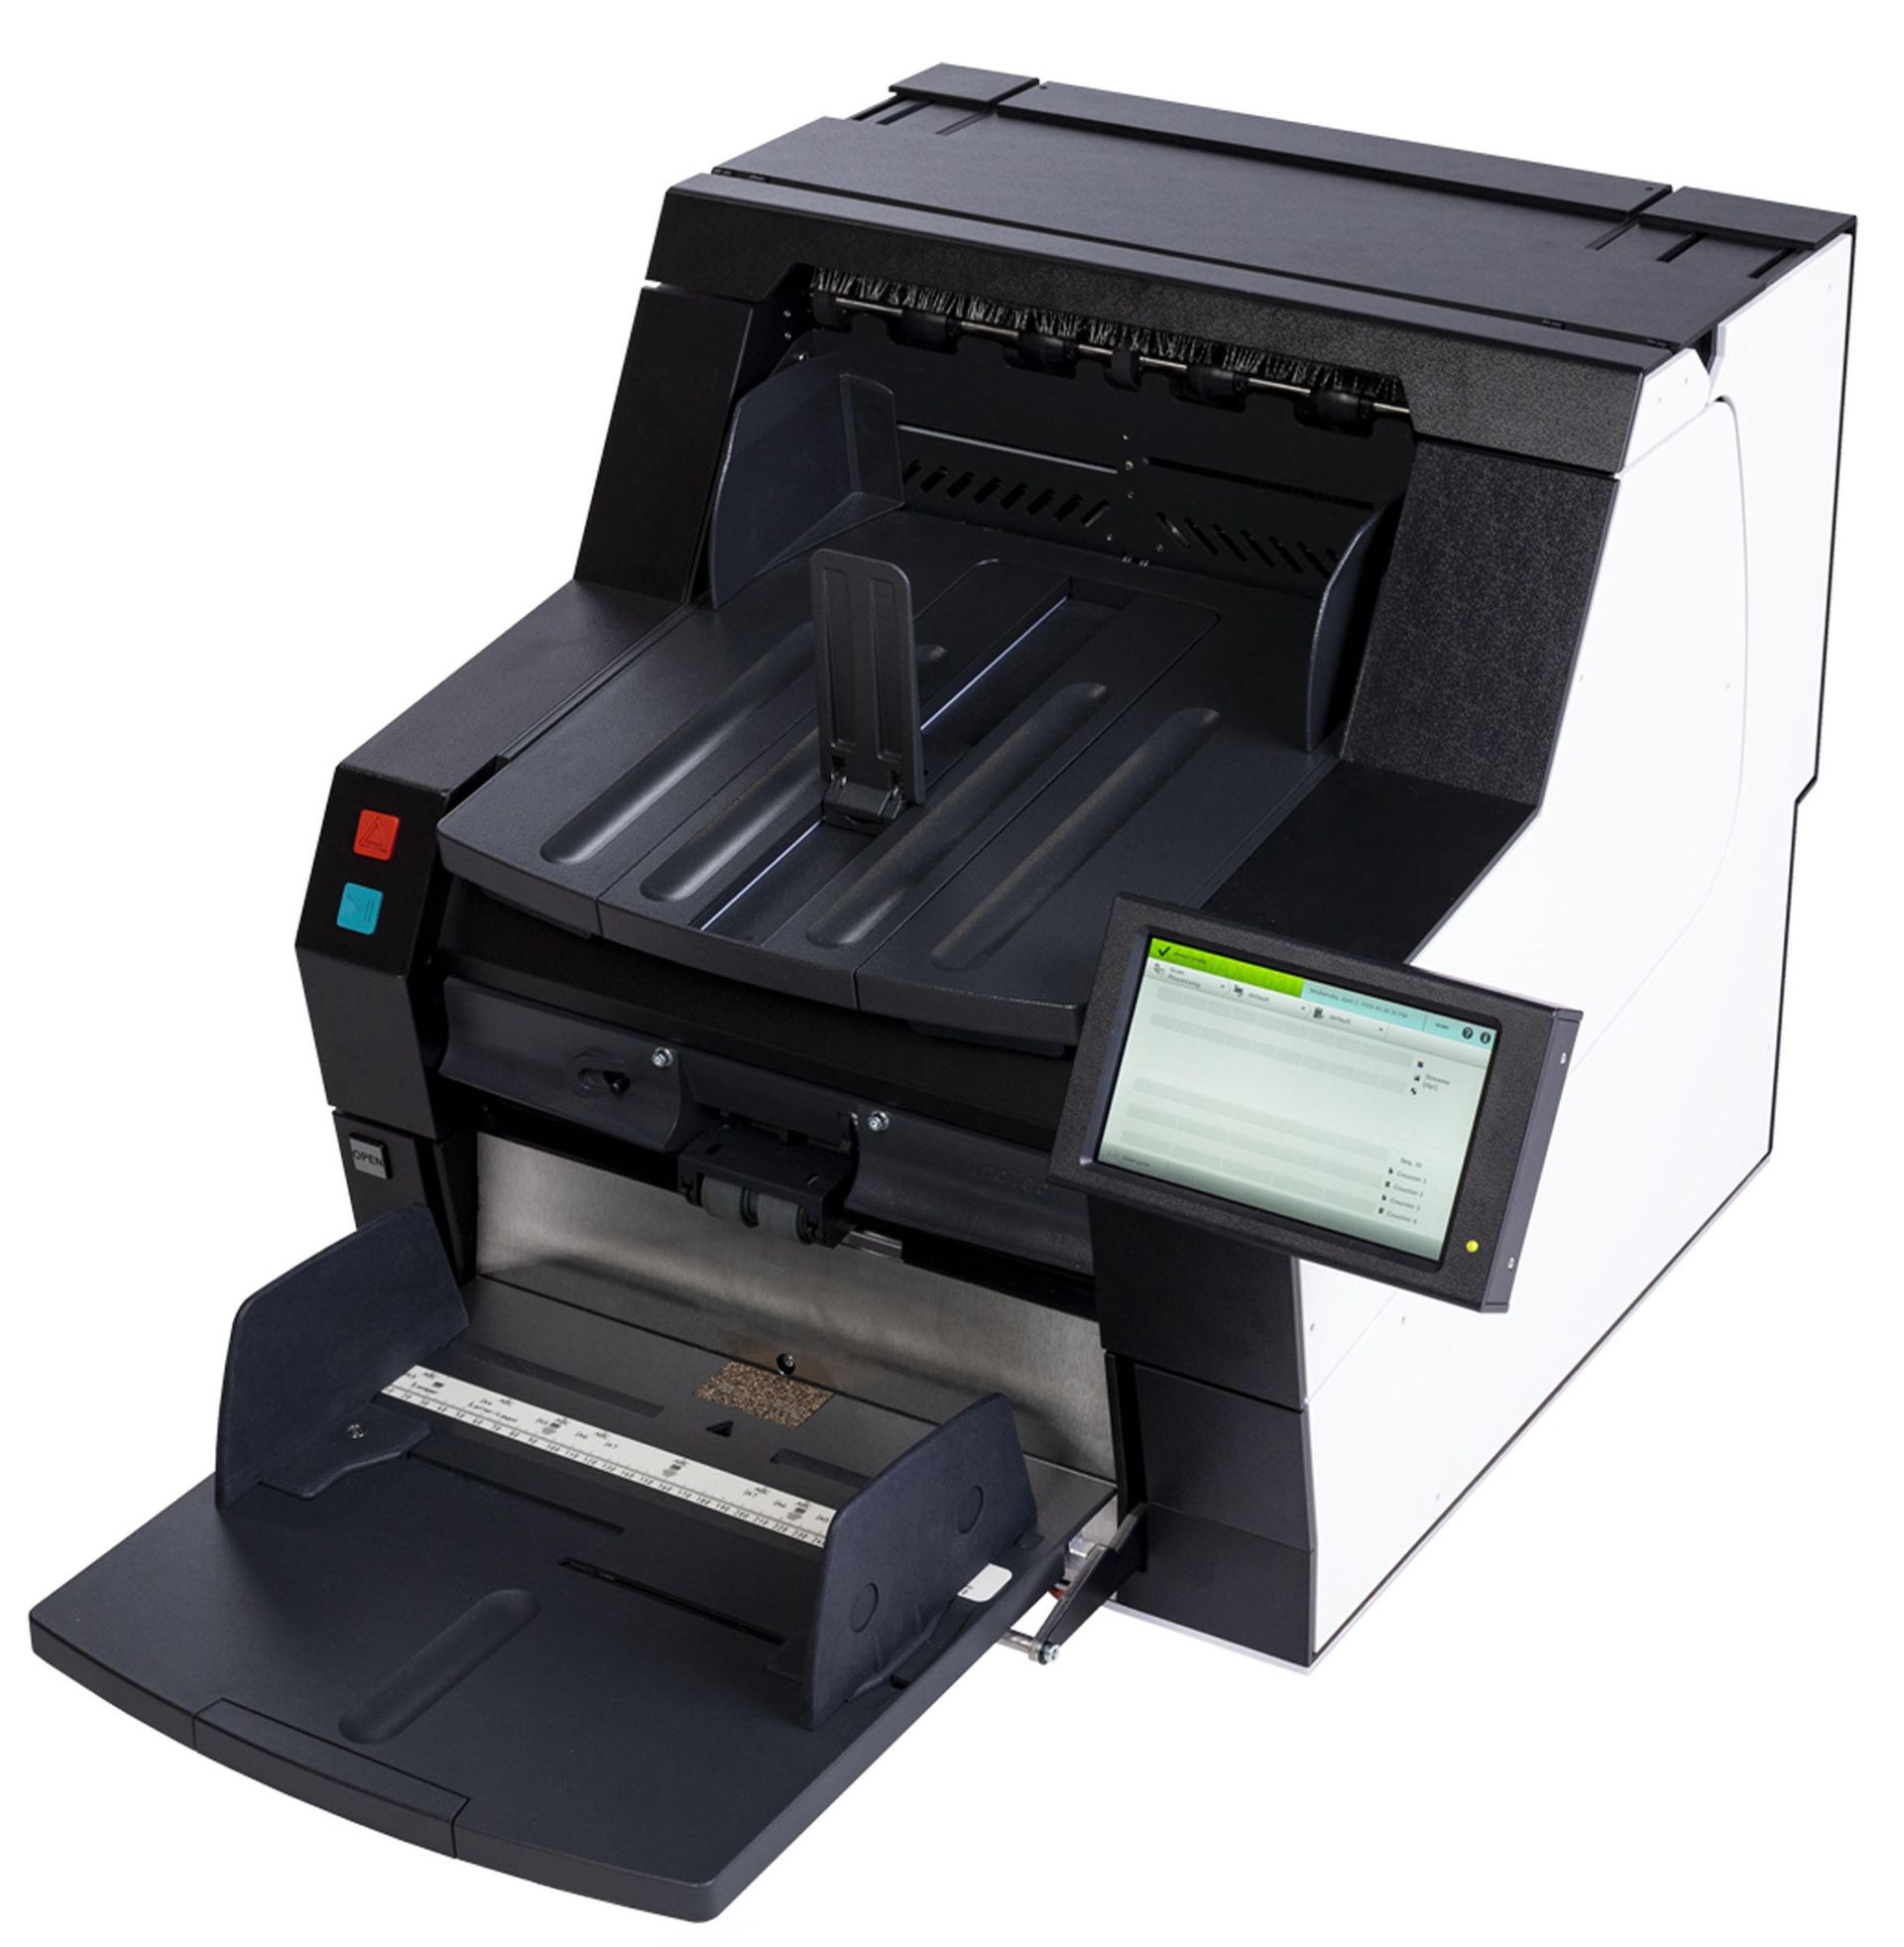 DeskPro 6x1 Desktop production scanner from interscan with a white background.